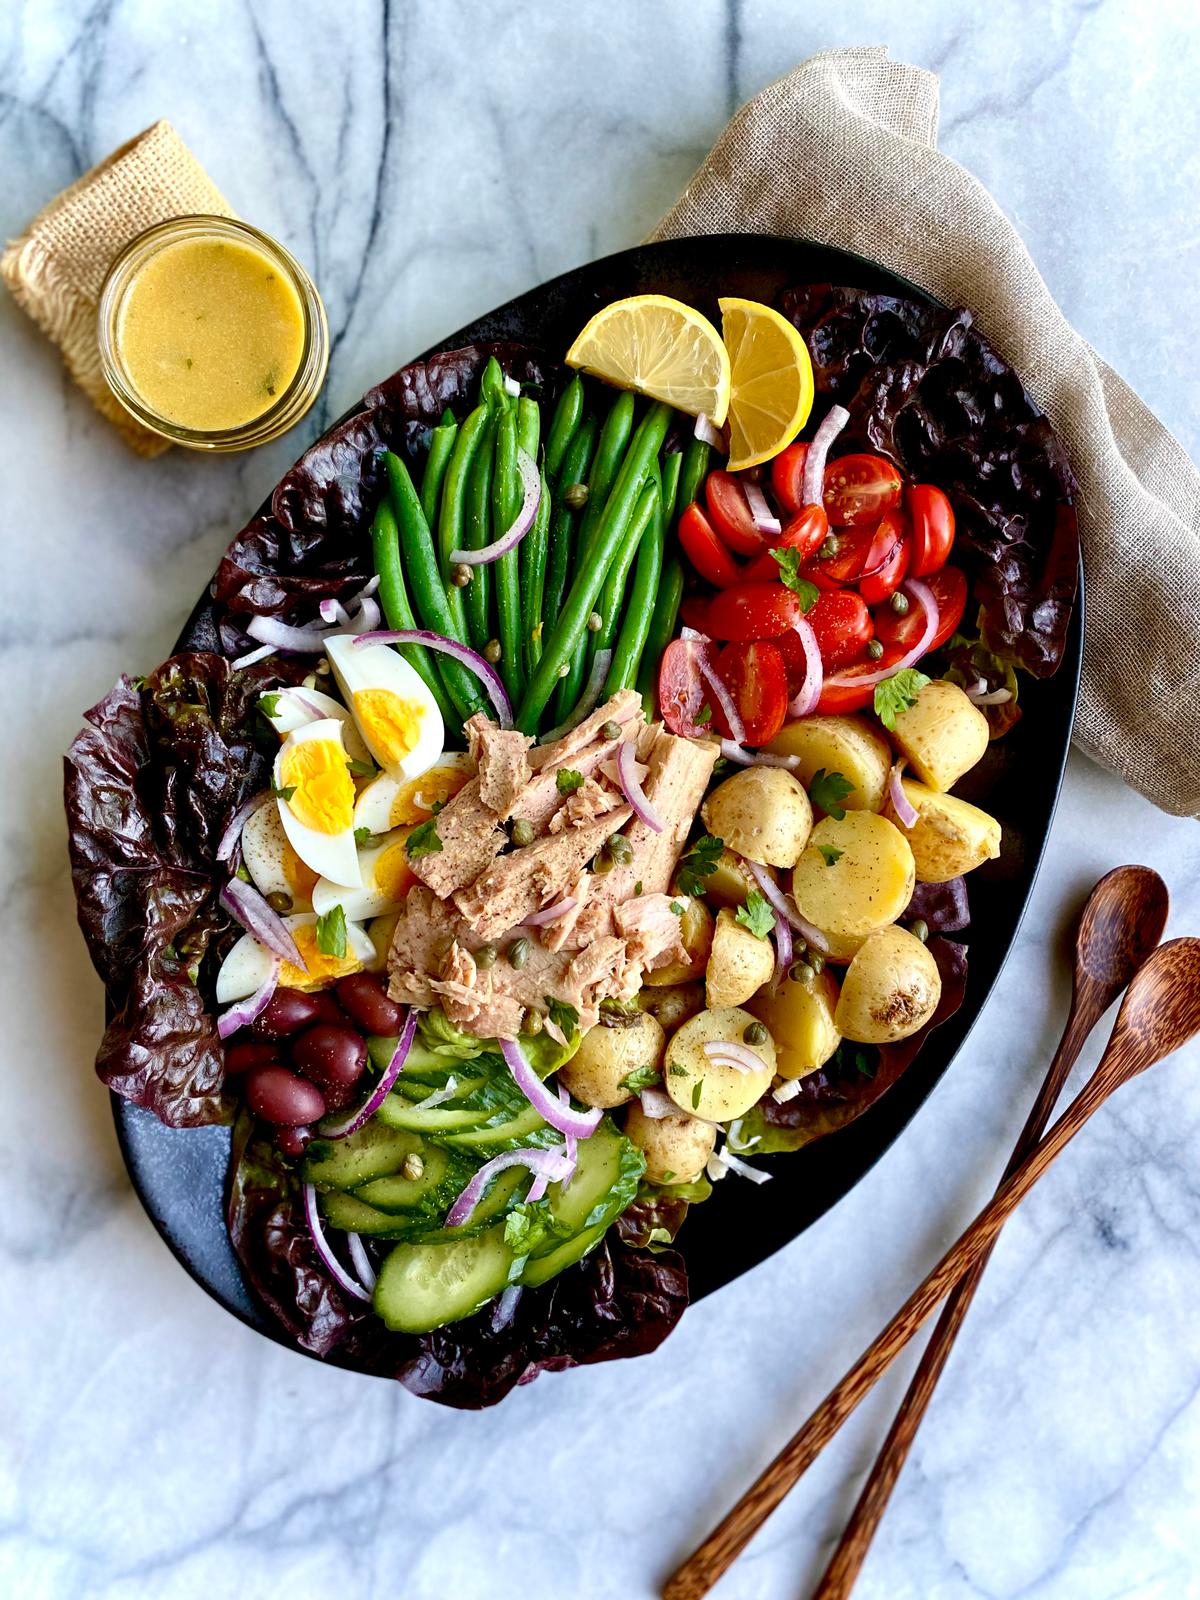 High-quality oil-packed tuna plays co-star to a medley of vegetables, hard-boiled eggs, and a smattering of salty, briny garnishes in this colorful salad. (Lynda Balslev for Tastefood)